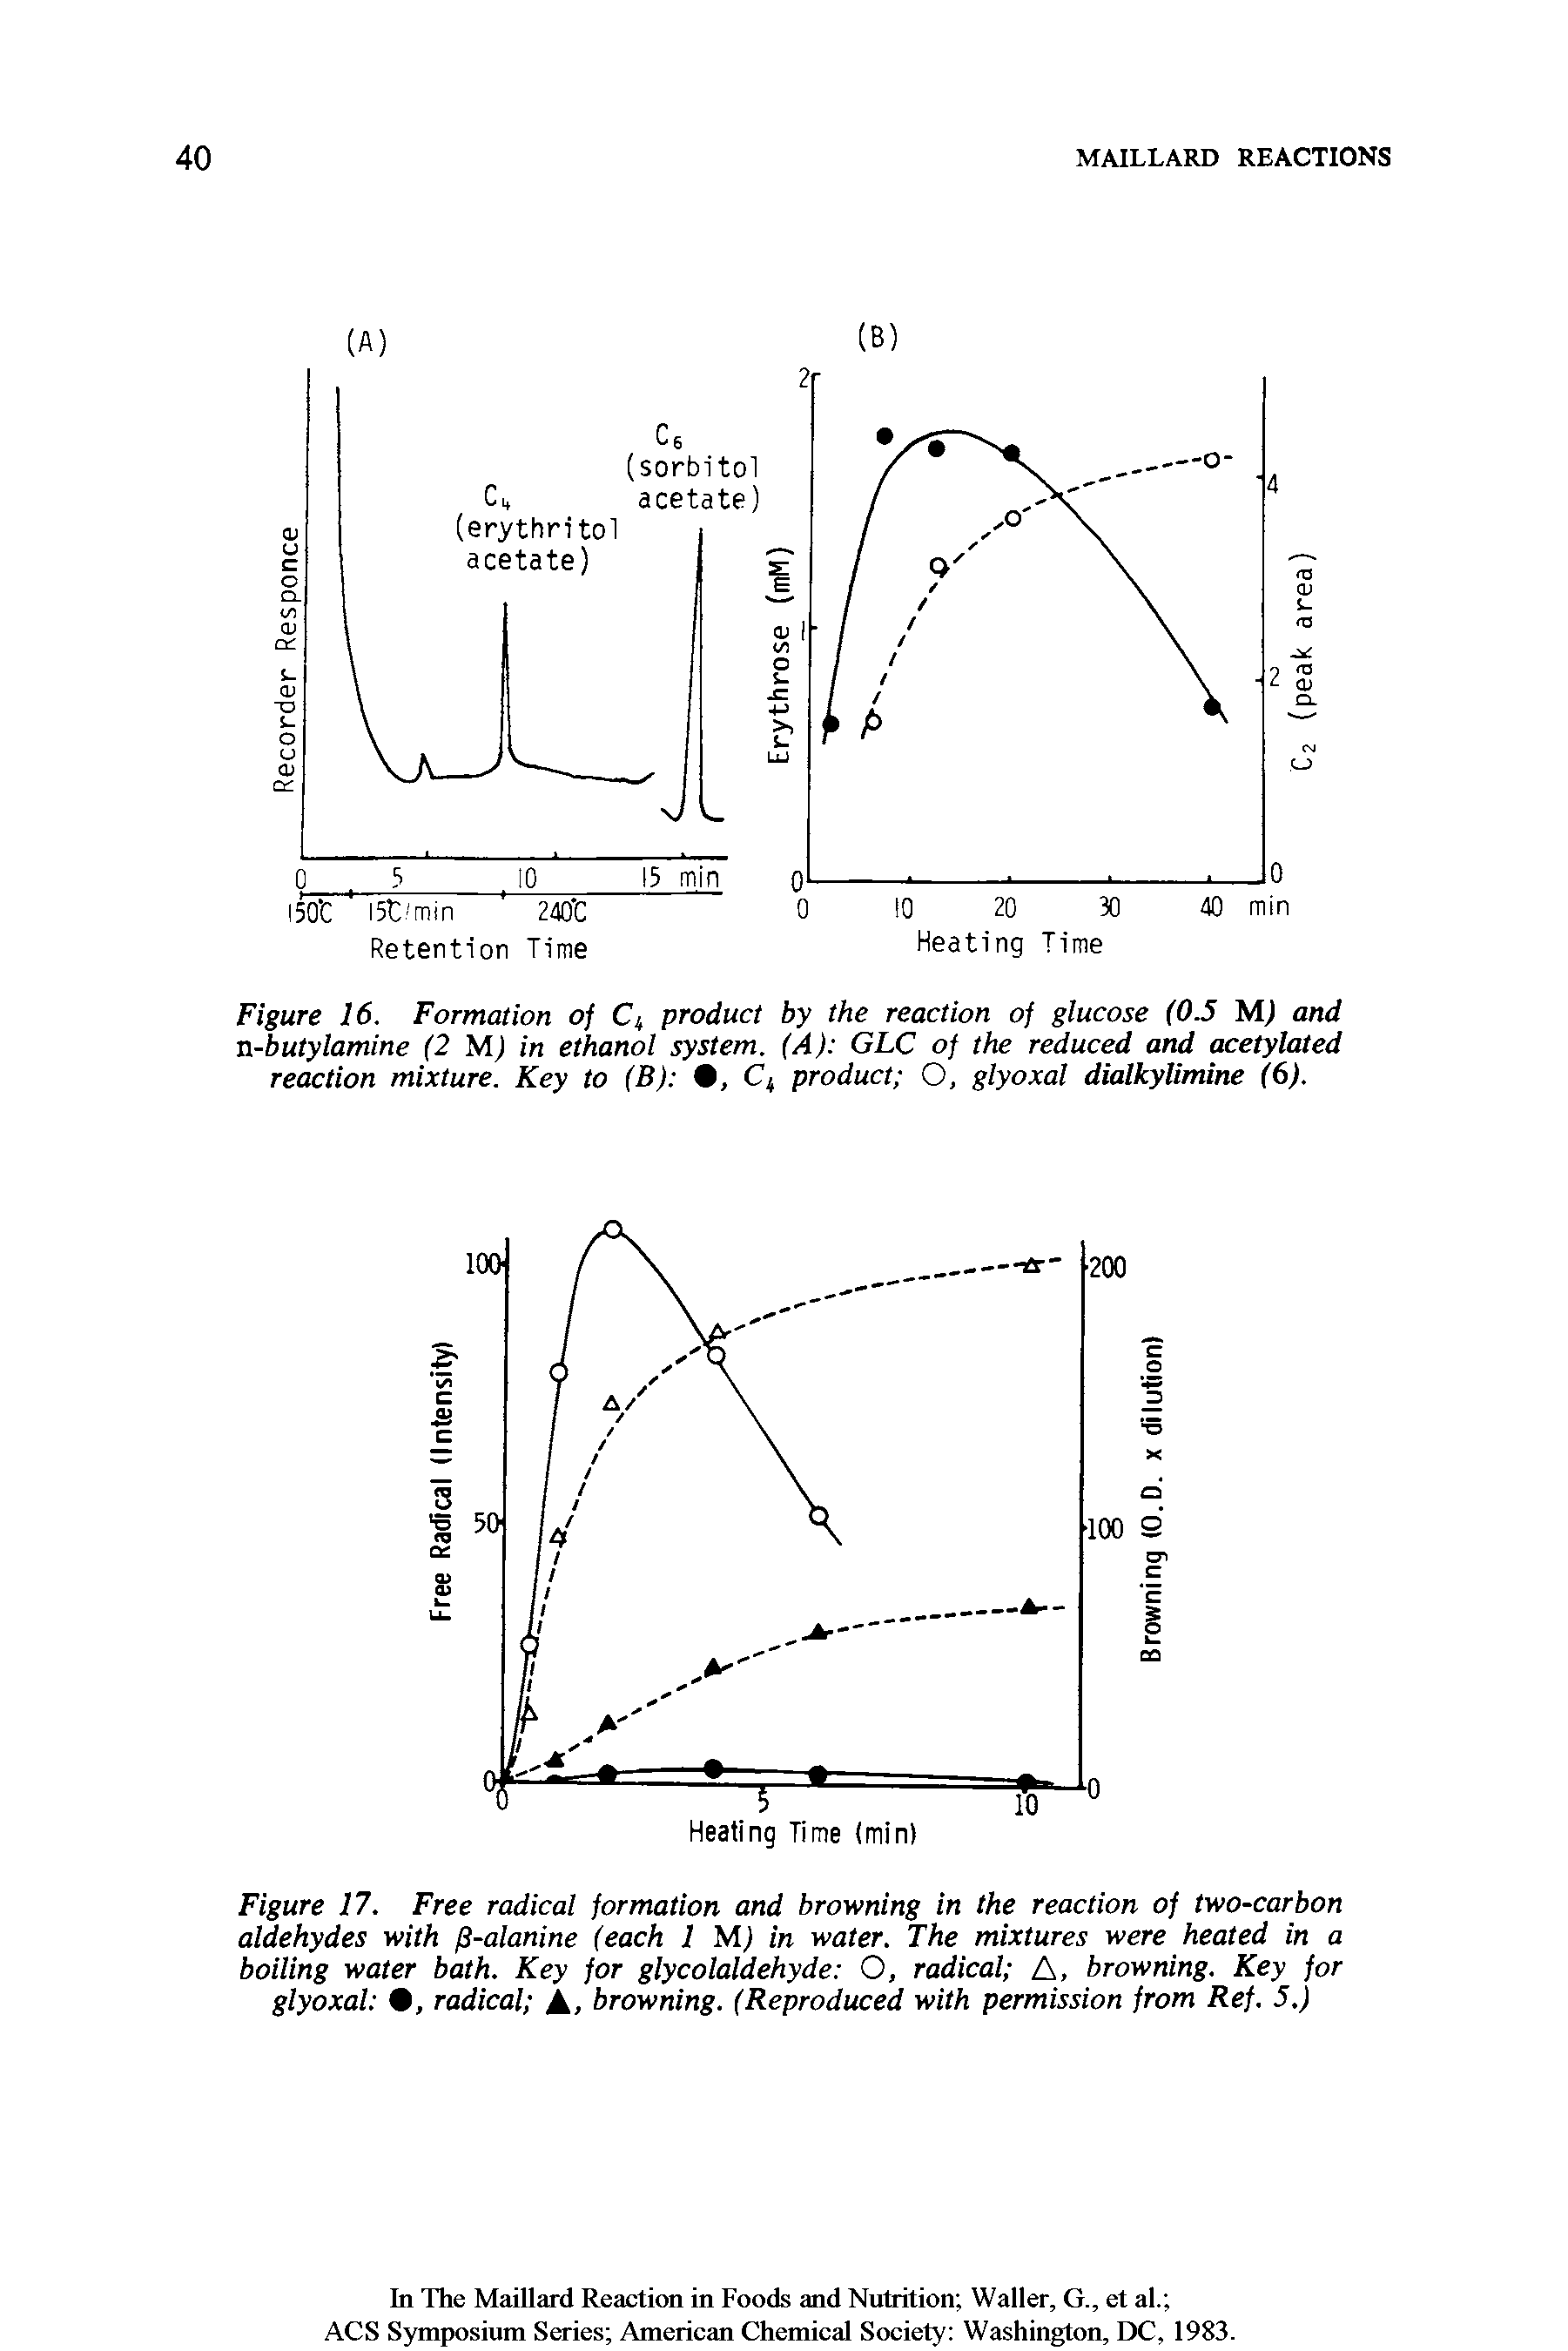 Figure 17. Free radical formation and browning in the reaction of two-carbon aldehydes with /3-alanine (each 1 M) in water. The mixtures were heated in a boiling water bath. Key for glycolaldehyde O, radical A, browning. Key for glyoxal , radical A, browning. (Reproduced with permission from Ref. 5.)...